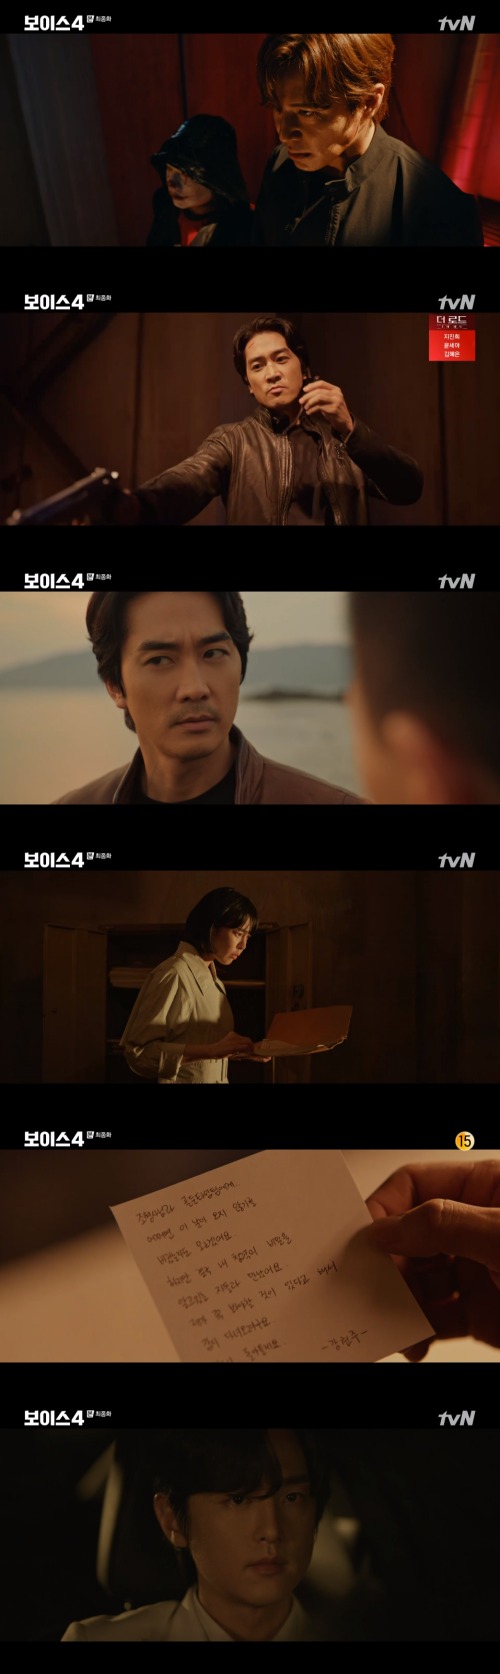 Seoul =) = Kwon Yul appeared in the final scene of Voice 4 and hinted that the secret to Lee Ha-nas auditory nerves will be revealed next season.In the TVN gilt drama Voice 4: The Time of Judgement (directed by Shin Yong-hwi/playplayplayed by Mar Jin-won/hereinafter referred to as Voice 4), which aired on the 31st, Kang Kwon-ju (Lee Ha-na) and Derek-heen (Song Seung-heon) succeeded in Arresting Dong Bang-min (Lee Gyoo-hyeong).On this day, Kang Kwon-ju went to Hospital, which was abandoned in the village, and regained all of his memory; the young Easterners and Kang Kwon-ju were in the same Hospital.Kang Kwon-ju and Derek Joe looked at Hospital and found medical records of Eastern and Kang Kwon-ju, who had been suffering from brain surgery due to a traffic accident.Dongbangmin was mentally abused by Dongbang Constitutional Korea (Janghangseon) as a child, causing personality division, and Kang Kwon-ju was missing Memory because of strong drugs.Kang Kwon-ju knew that Hospital was a secret place for the East through the faint sound of the sound.Dongbangmin tied the Dongbang Constitution into a bulb. At this time, Kang Kwon-ju and Derek Joe came in.Its an opportunity to kill both of them at once, provoked Derek Joe. The Easterners fled and Derek Joe followed. Derek Joe and the Easterners pointed guns at each other.Kang Kwon-ju said that he had a memory to the Eastern people, and the stimulated Eastern people showed various personality at the same time.Kill him, the Easterner said. But Derek Joe said to the Easterner, Live in prison for the rest of your life. The Easterner was Arrested.Hanwoo (Kang Seung-yoon) reported to Kang Kwon-ju that the site of the Eastern people seemed to be related to Fabre. Fortunately, Shim Dae-sik was safe.Some people have testified that Derek Joe was abused as a child. Kang Kwon-ju, thinking of the dead Do Kang-woo (Lee Jin-wook), vowed to become a better police officer.Derek Joe told Kang Kwon-ju, It was the best police officer and the best partner. Kang Kwon-ju said, Do not forget that you stopped revenge at the end.After completing the case, Kang Kwon-ju further investigated Hospital, who knew too much about his ears; Hospital, hearing aids and research institutes were all associated with Favre.Chad (played by Han Jong-hoon) reported to Derek Joe that he saw someone at Shim Dae-siks Hospital who said Case 1 while watching Kang Kwon-ju.Kang Kwon-ju, who arrived at Hospital, heard a womans voice in Memory: I wonder what that hearing looks like to you, the woman said.Derek Joe went to Hospital to find Kang Kwon-ju, but Kang Kwon-ju disappeared.Kang Kwon-ju left a note saying that he met a person who knew the secret of his ear and left his police officers card and handcuffs.Derek Joe found the same vortex pattern and Fabre as the tattoo of the Eastern people on the covered wall; Kang Kwon-ju left in a car of the anti-quake water (Kwon Yul Boone).